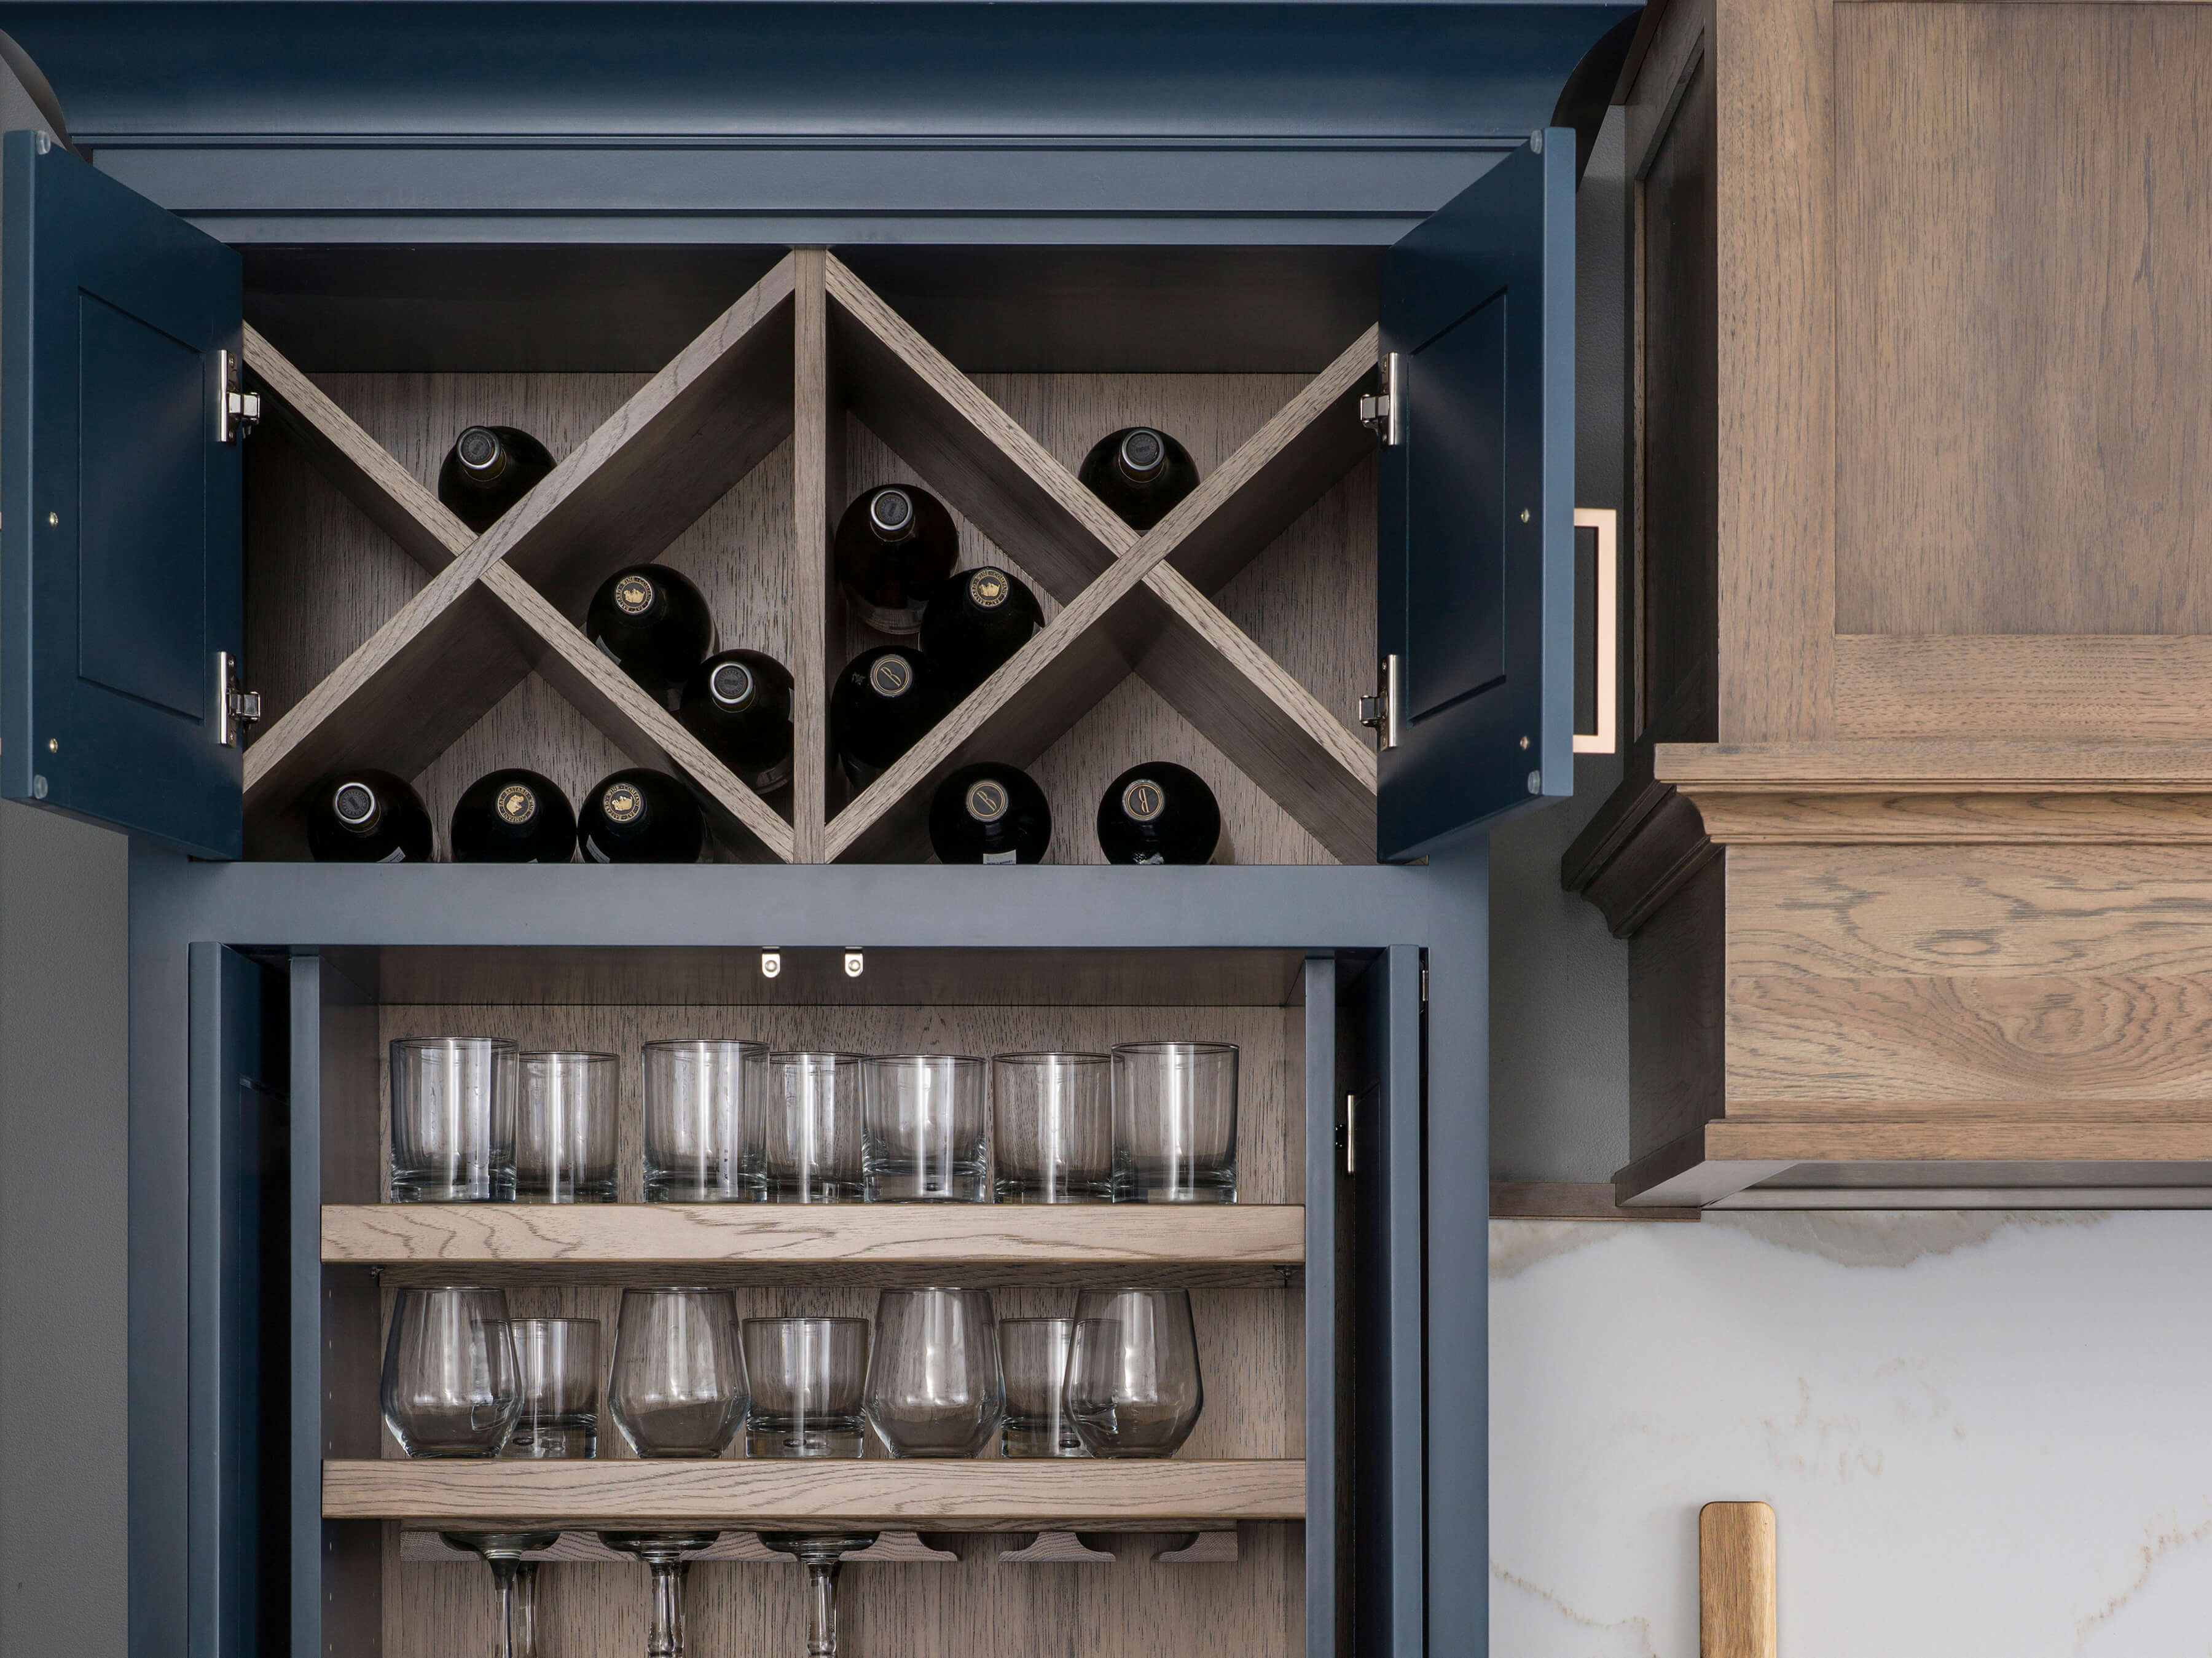 The top of the larder cabinet has two x wine racks up high and out of reach of little ones, as well as plenty of storage for glassware. This modern farmhouse kitchen has two-tone cabinets in a navy blue paint and a medium stained hickory.